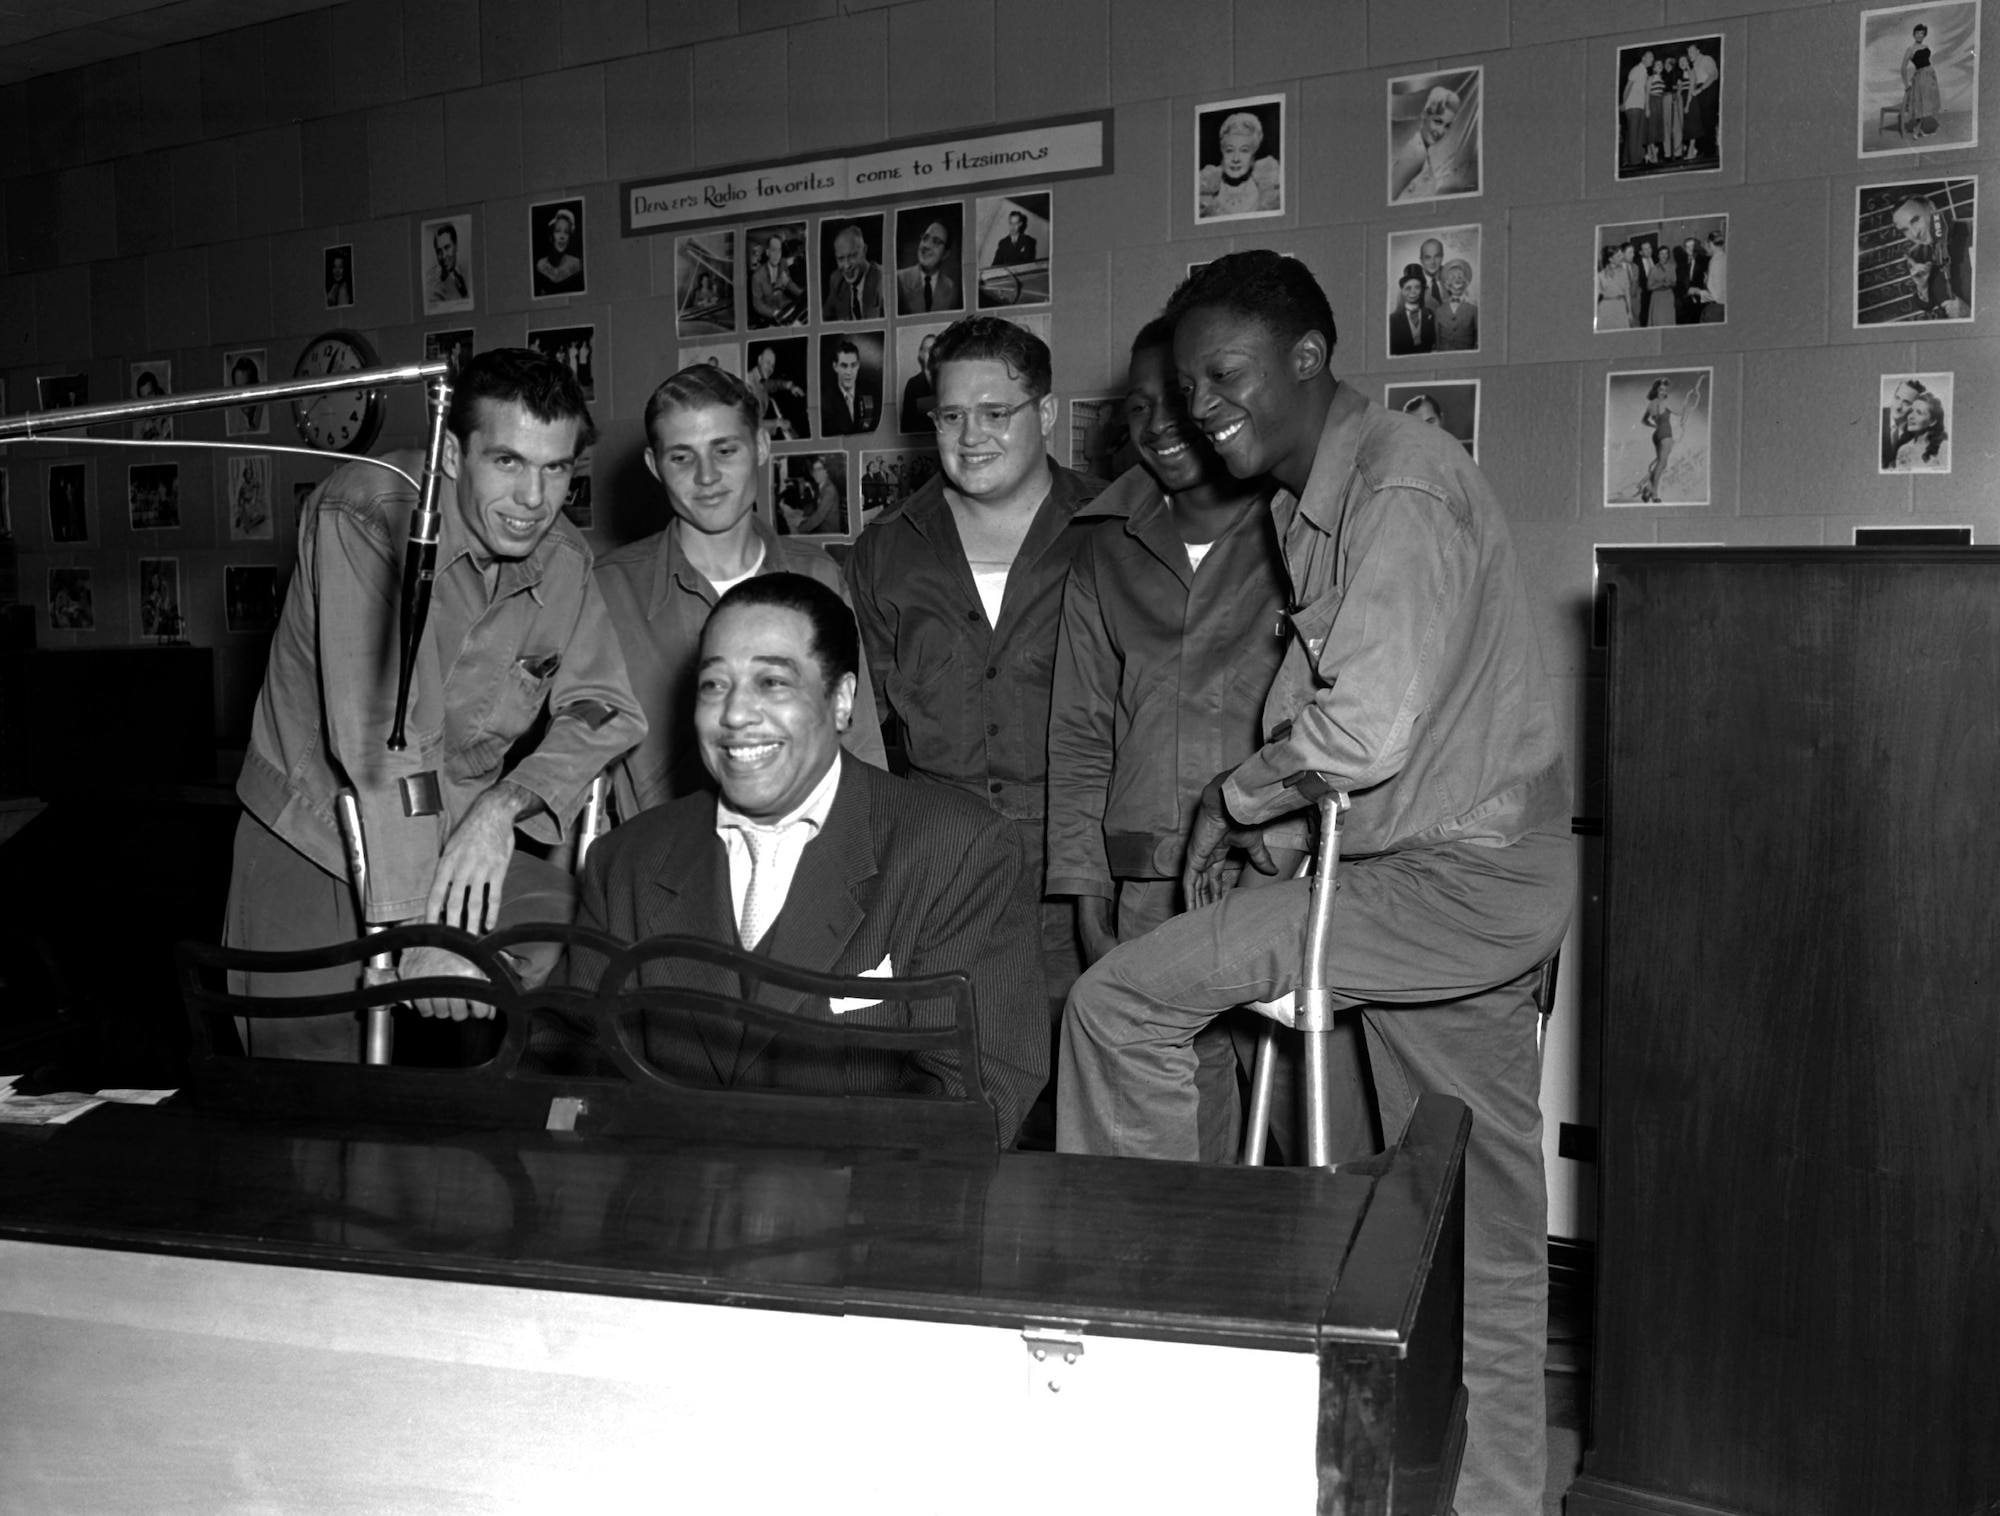 Jazz pianist Duke Ellington performs for patients Nov. 3, 1954, at the KFG Radio Studio for Fitzsimons Army Medical Center in Aurora, Colorado. In 1958, Ellington played a show at Travis Air Force Base, California, that was released as a live album in 1987. (U.S. Army photo)